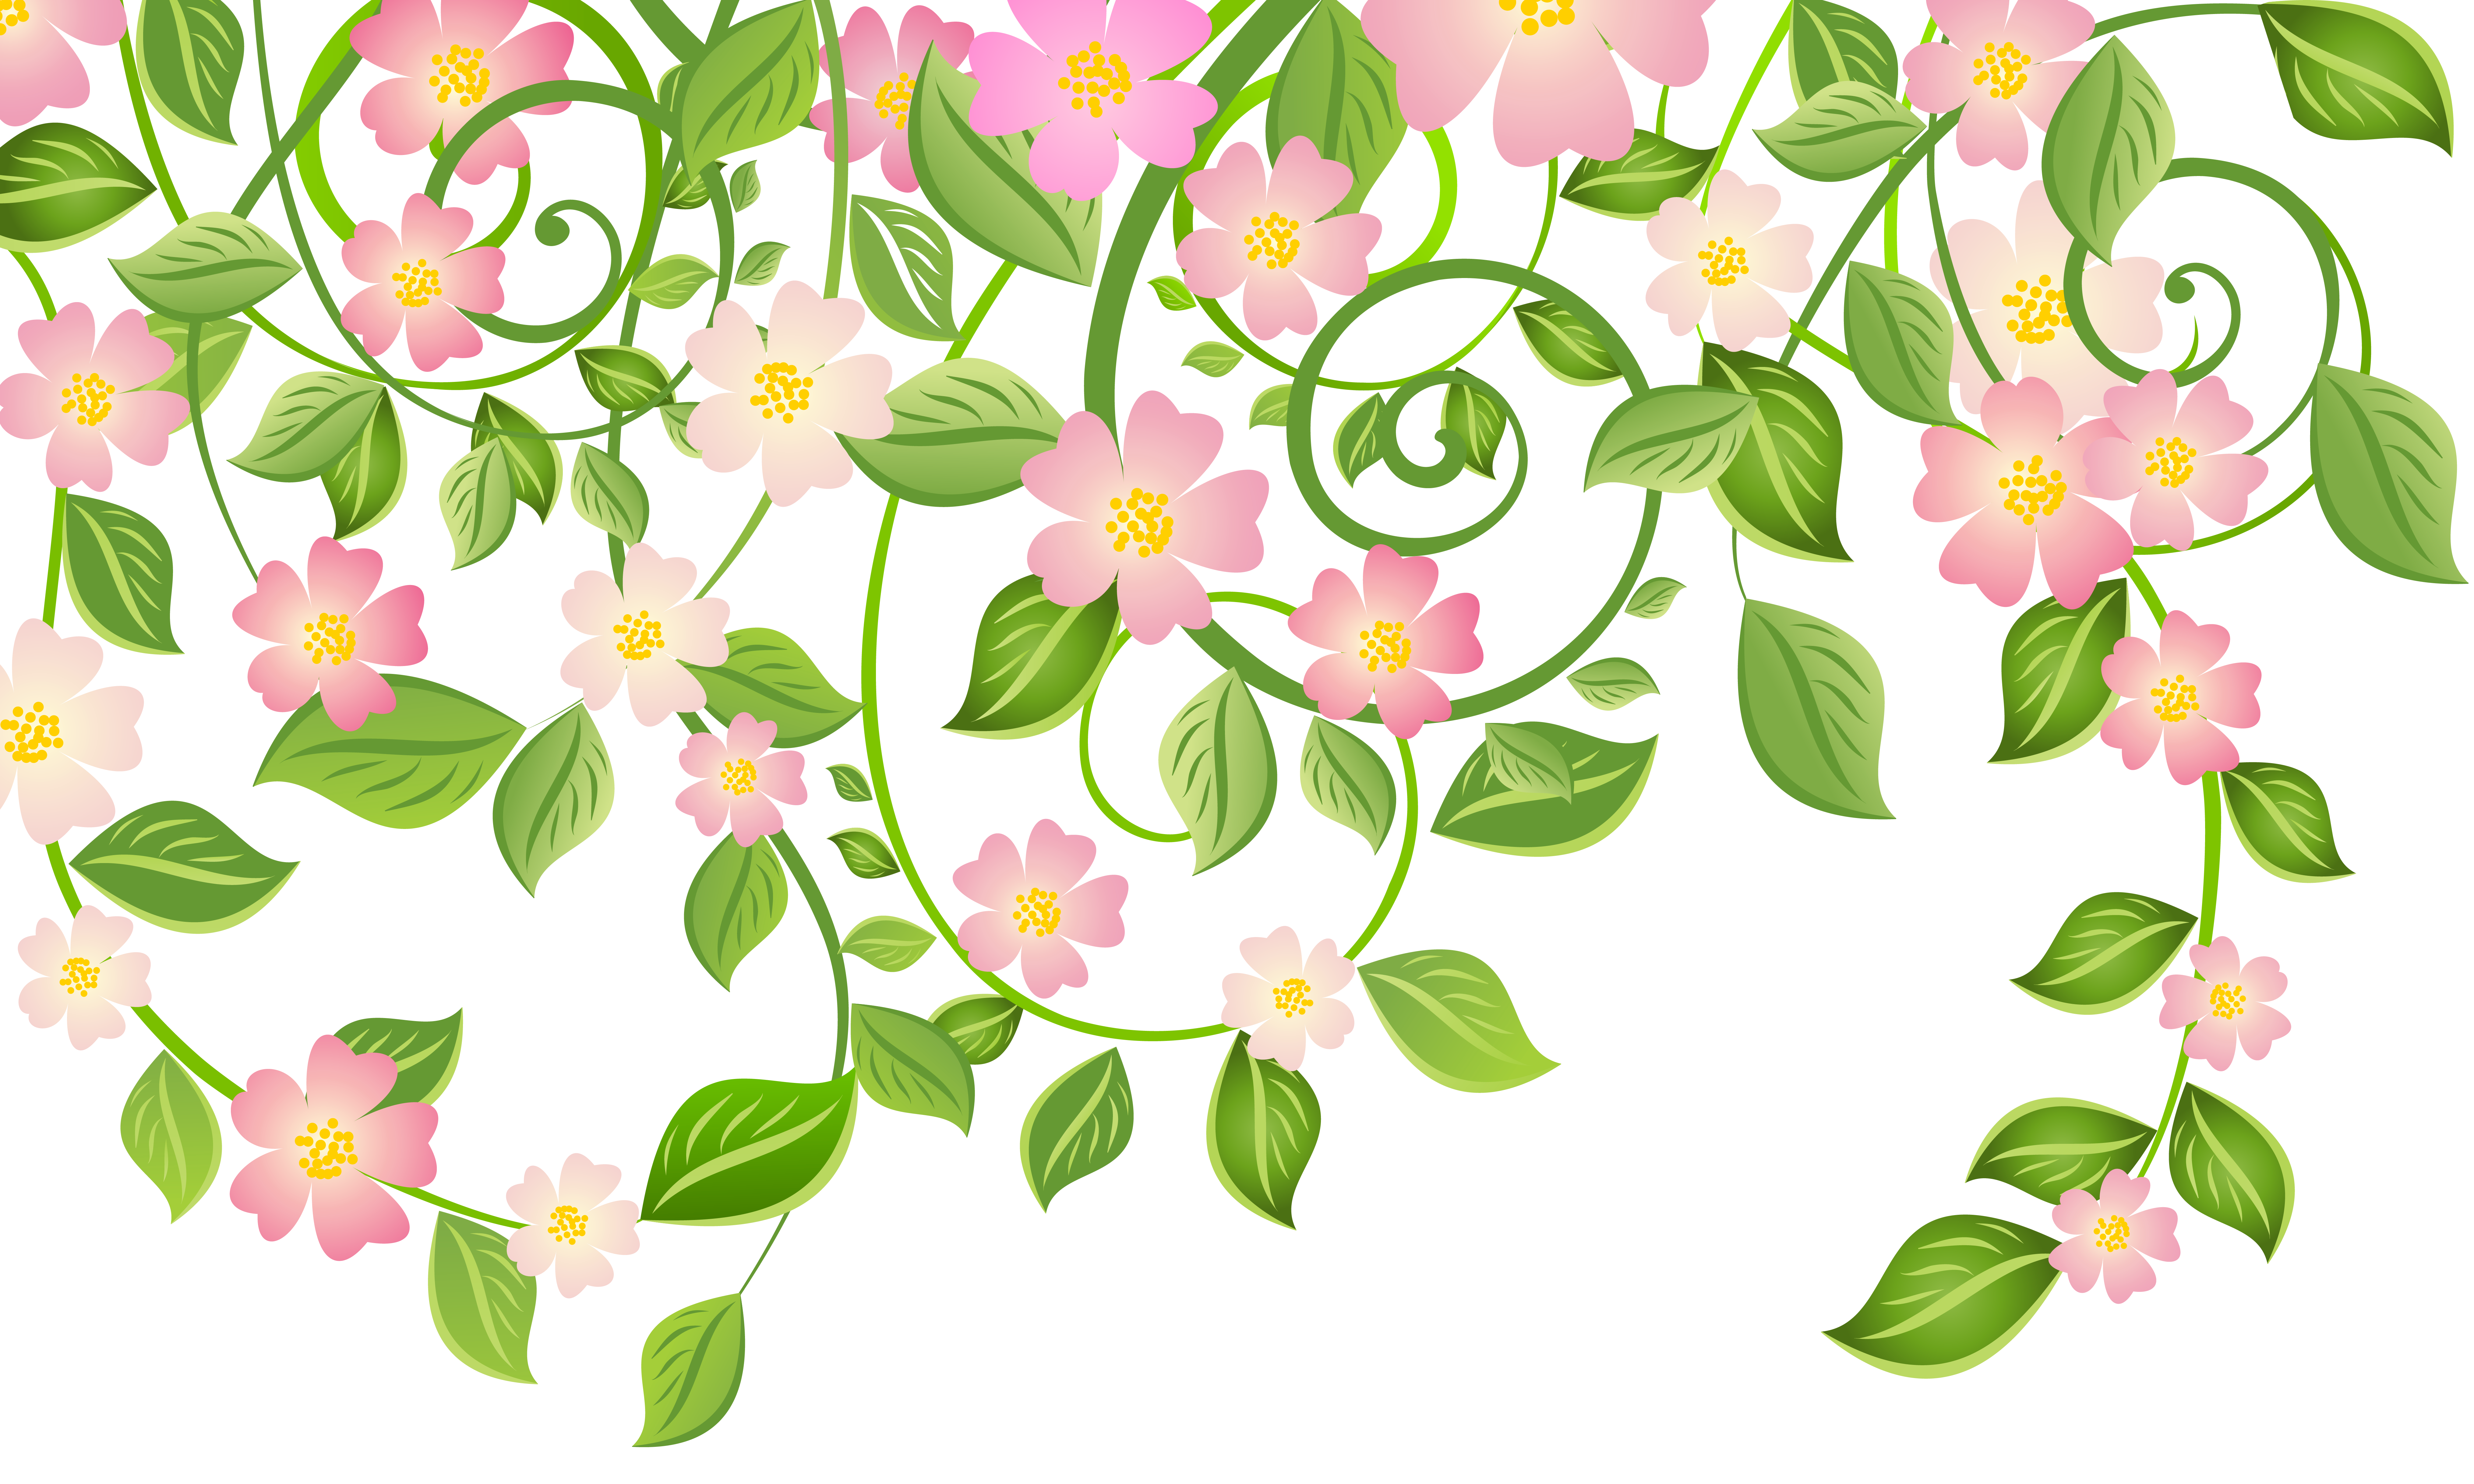 Spring Blossom Decoration with Leaves Transparent PNG Clip Art Image 